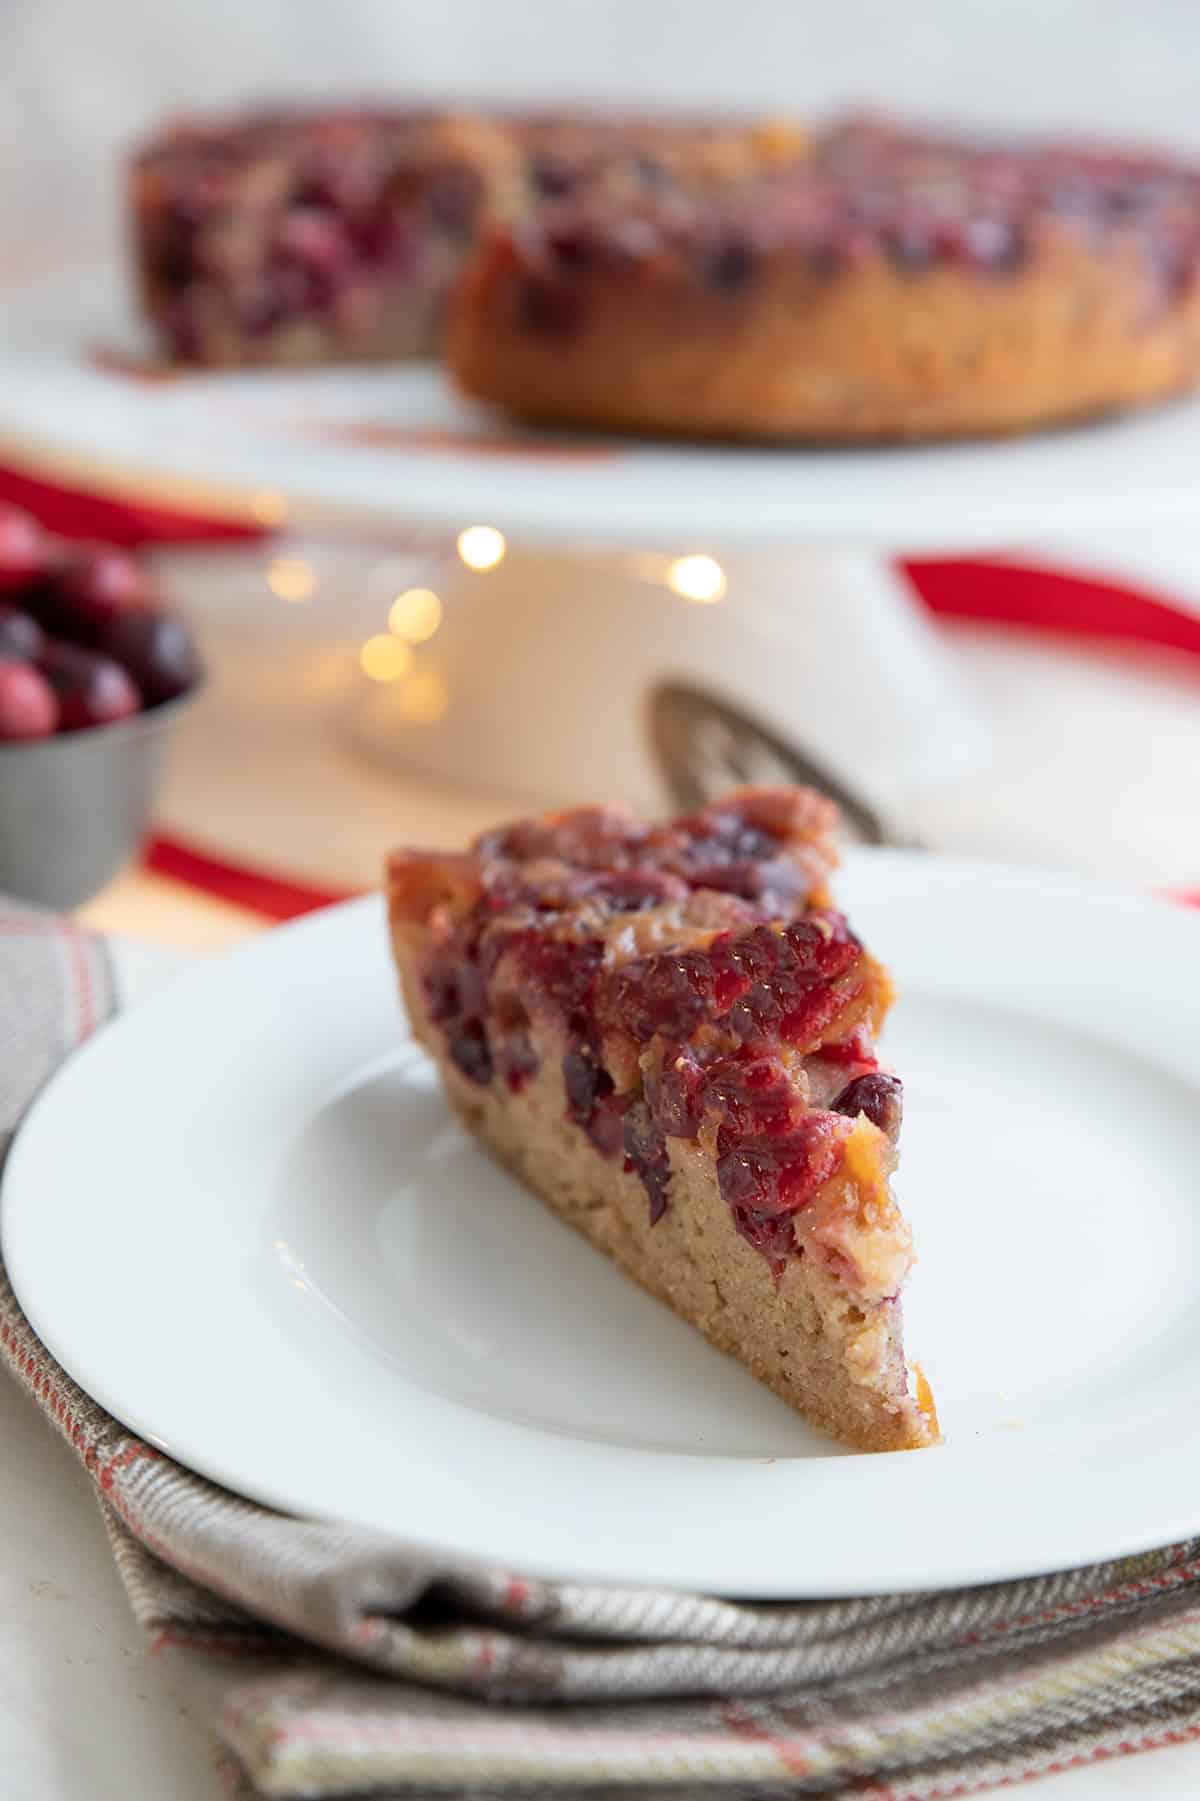 A slice of cranberry upside down cake on a white plate over a grey plaid napkin.